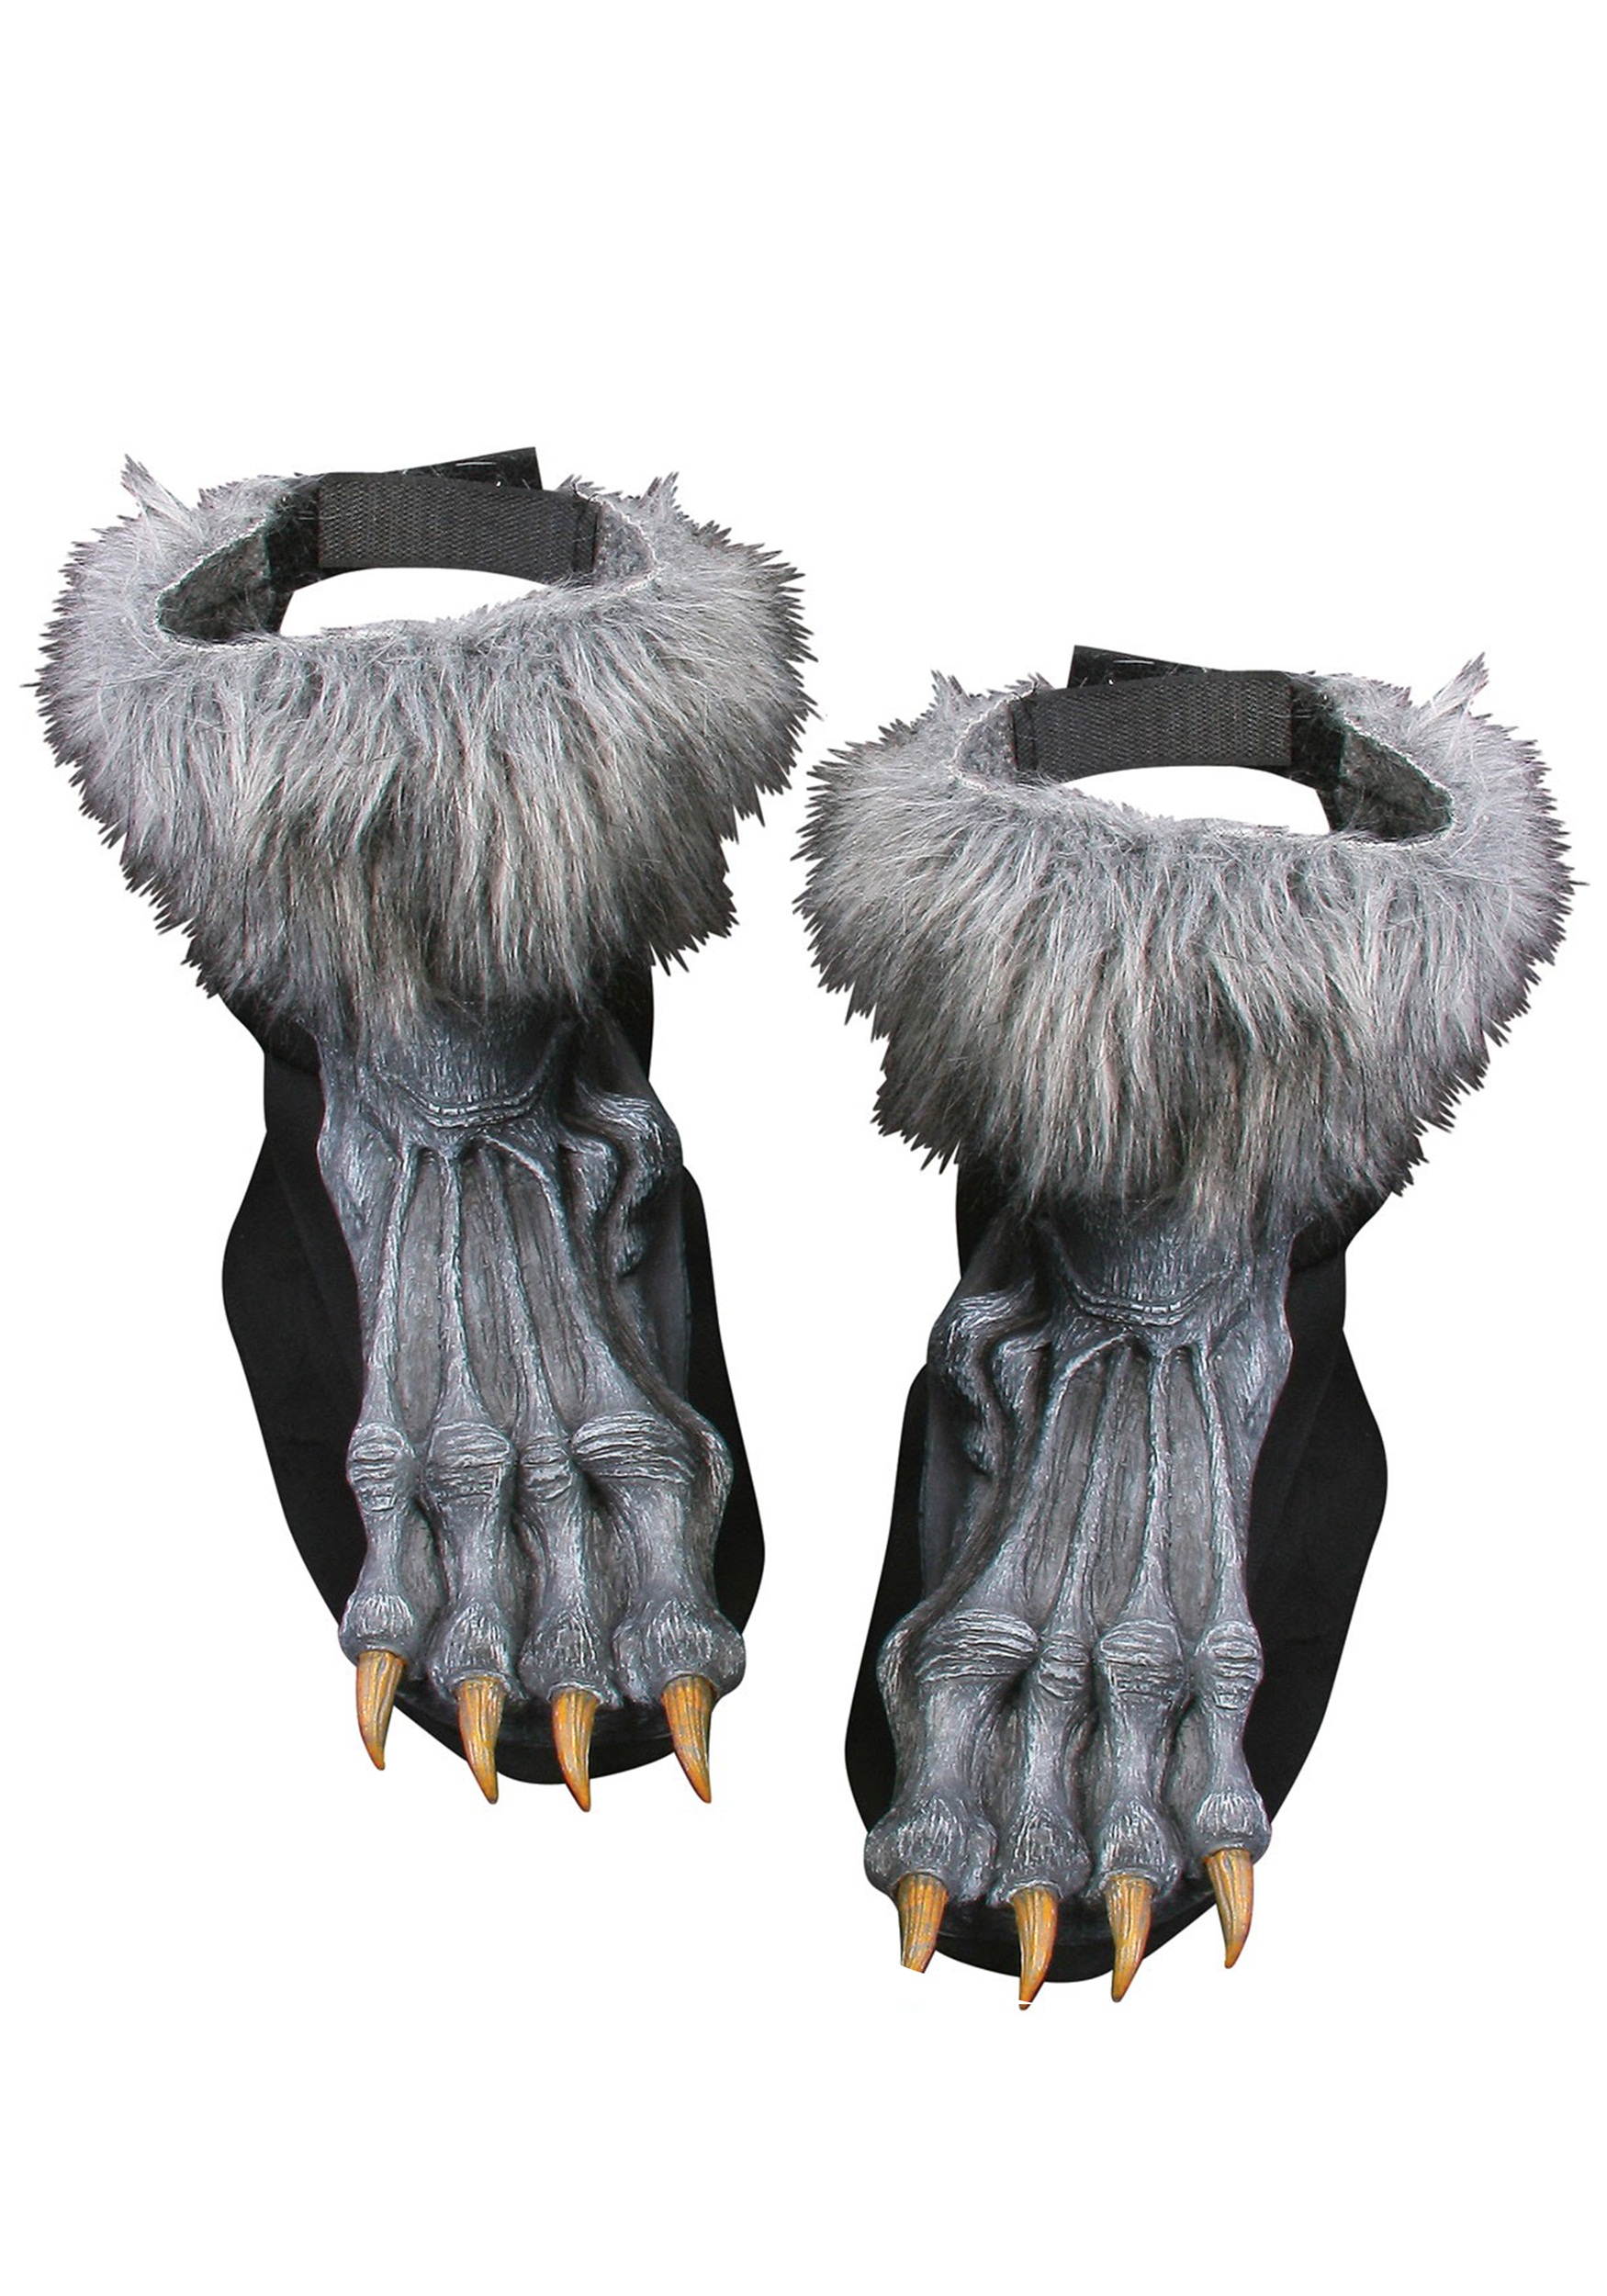 silver boot covers